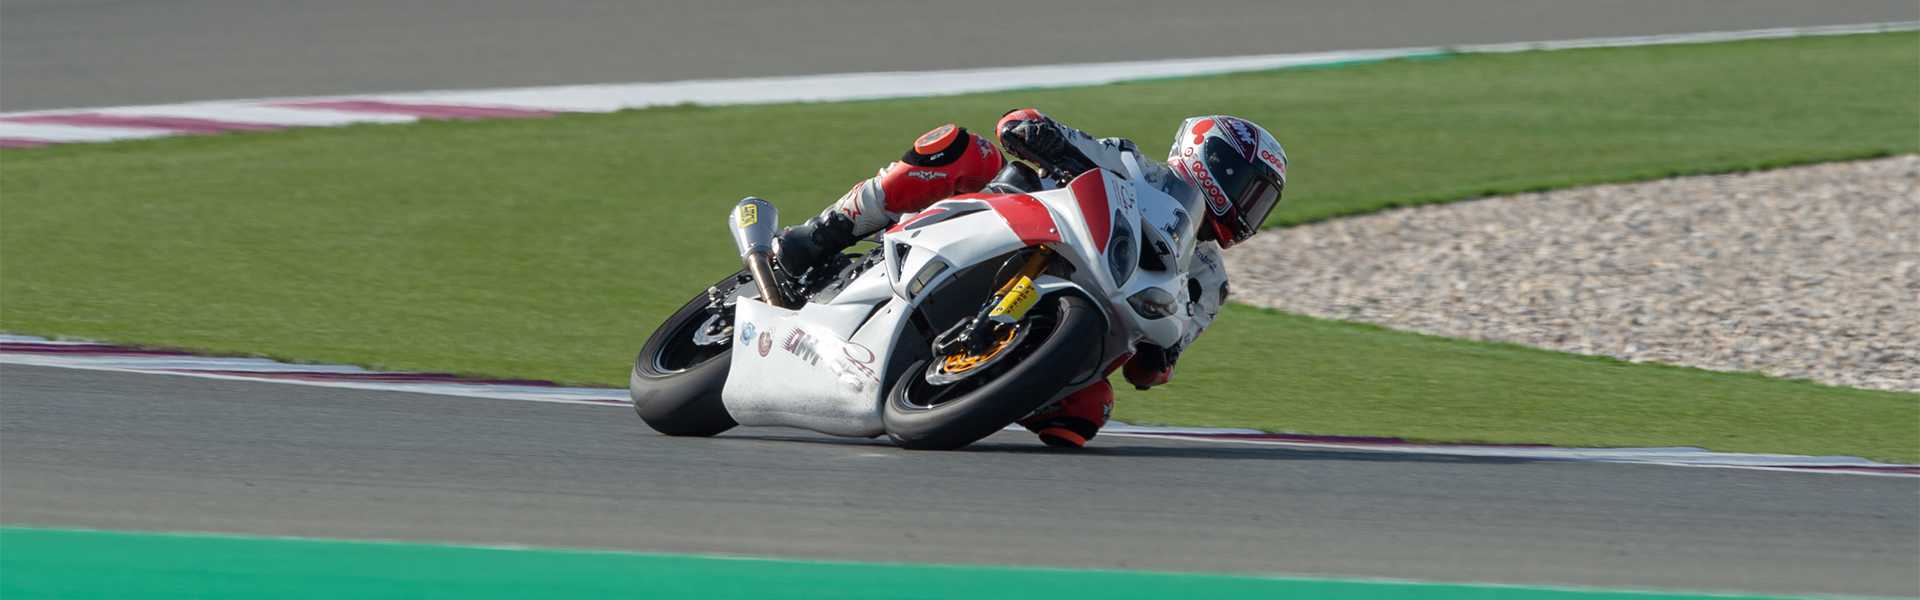 Qatar Superstock 600 kicks off a new season with two days of official practice